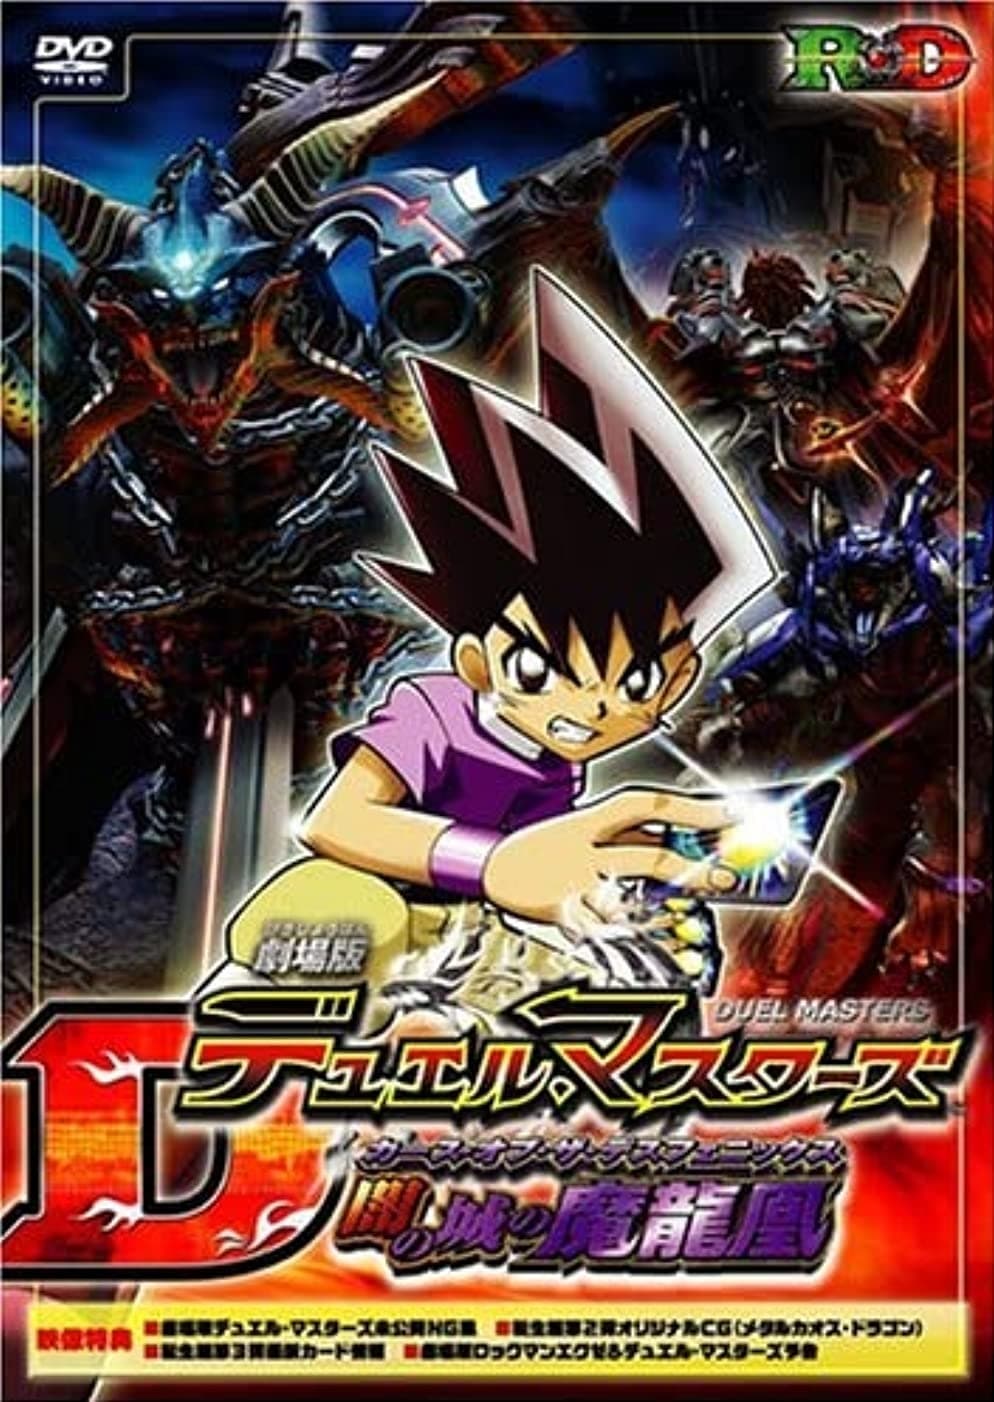 Duel Masters: Curse of the Death Phoenix